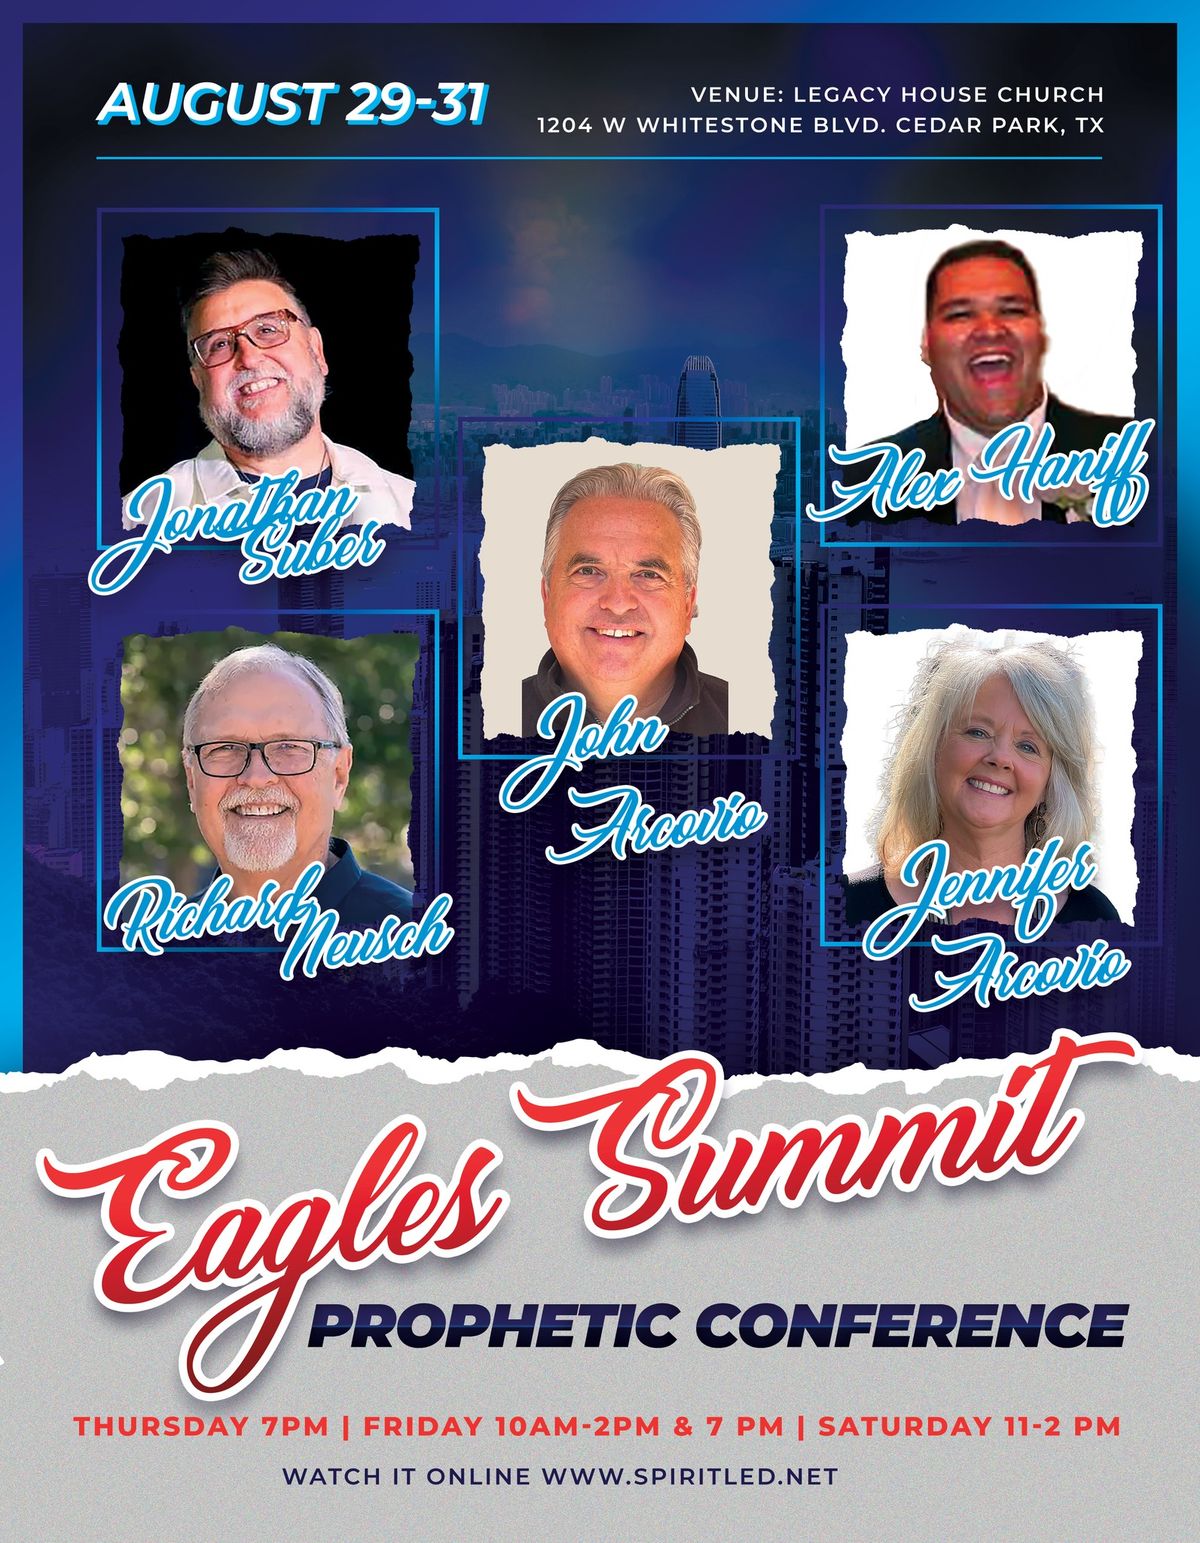 25th Annual Eagles Summit Prophetic Encounter